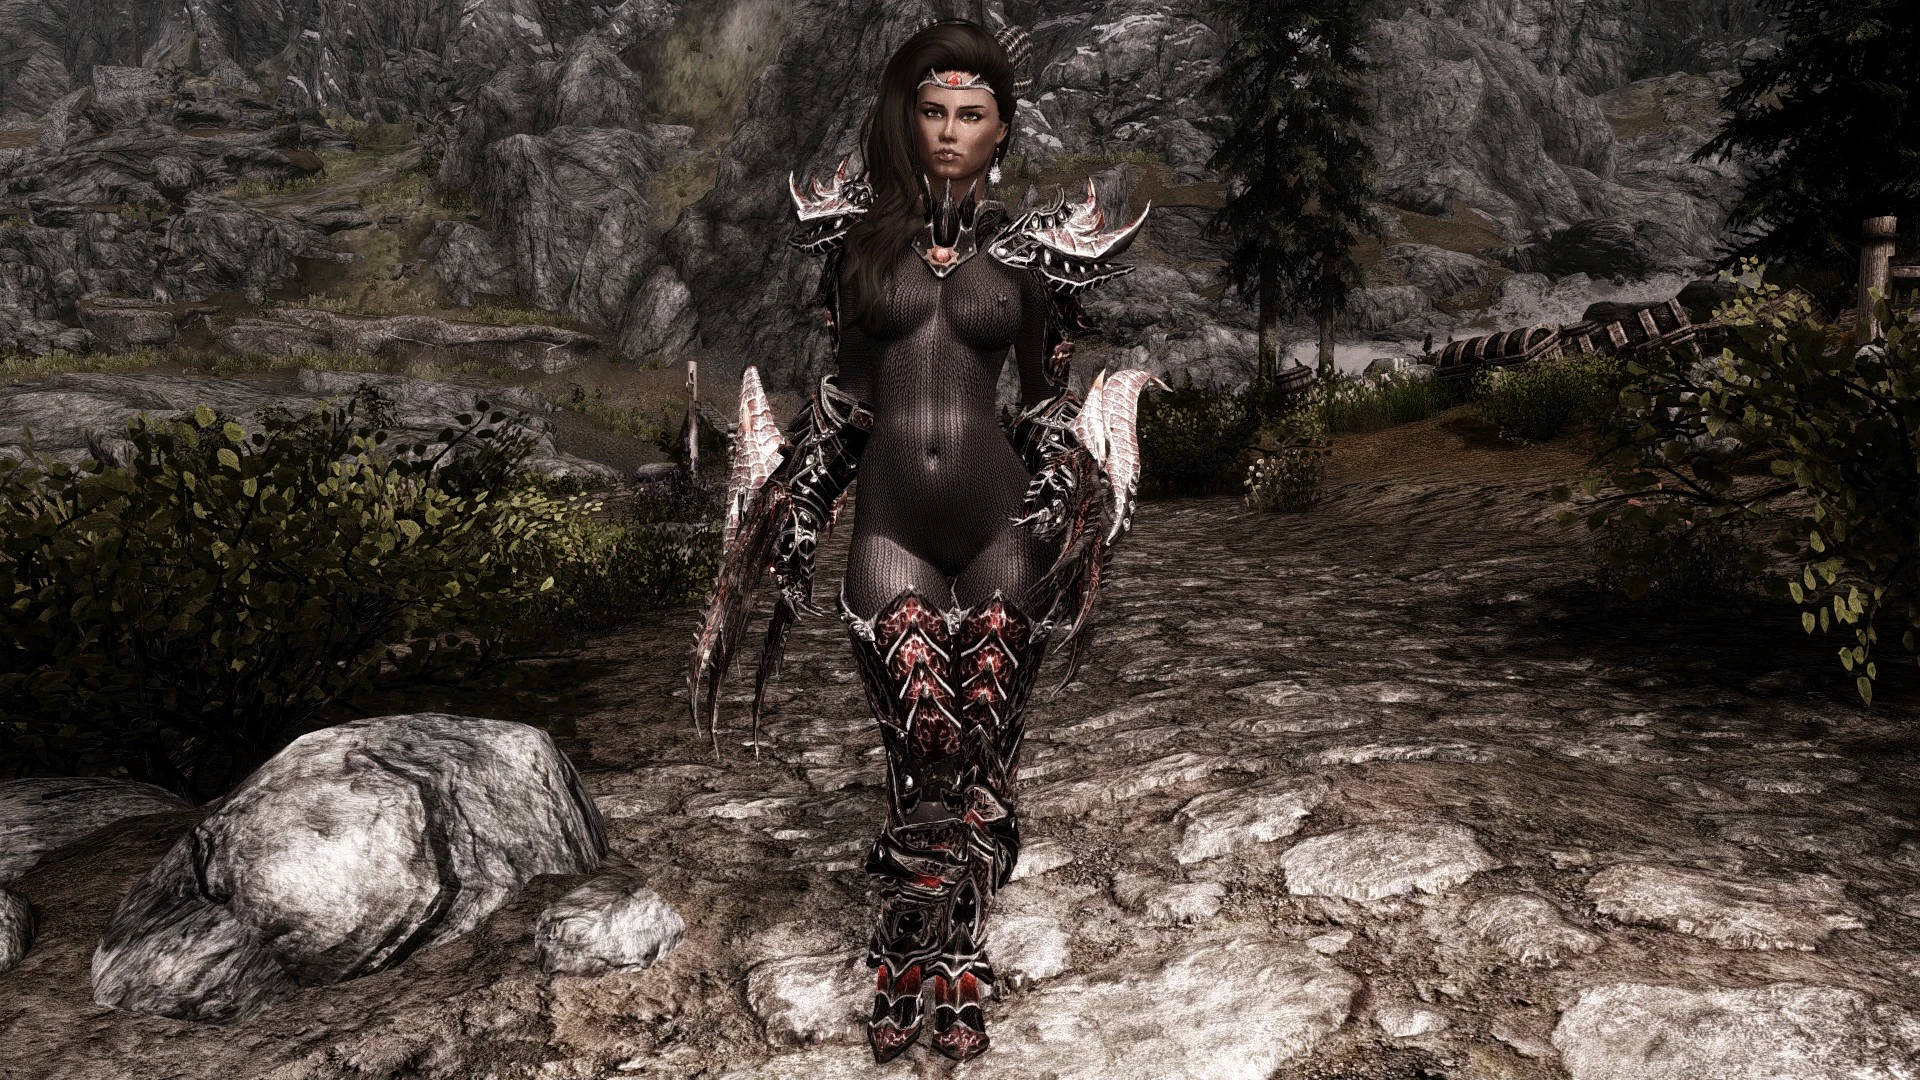 Cora in Armored Daedric Front. 